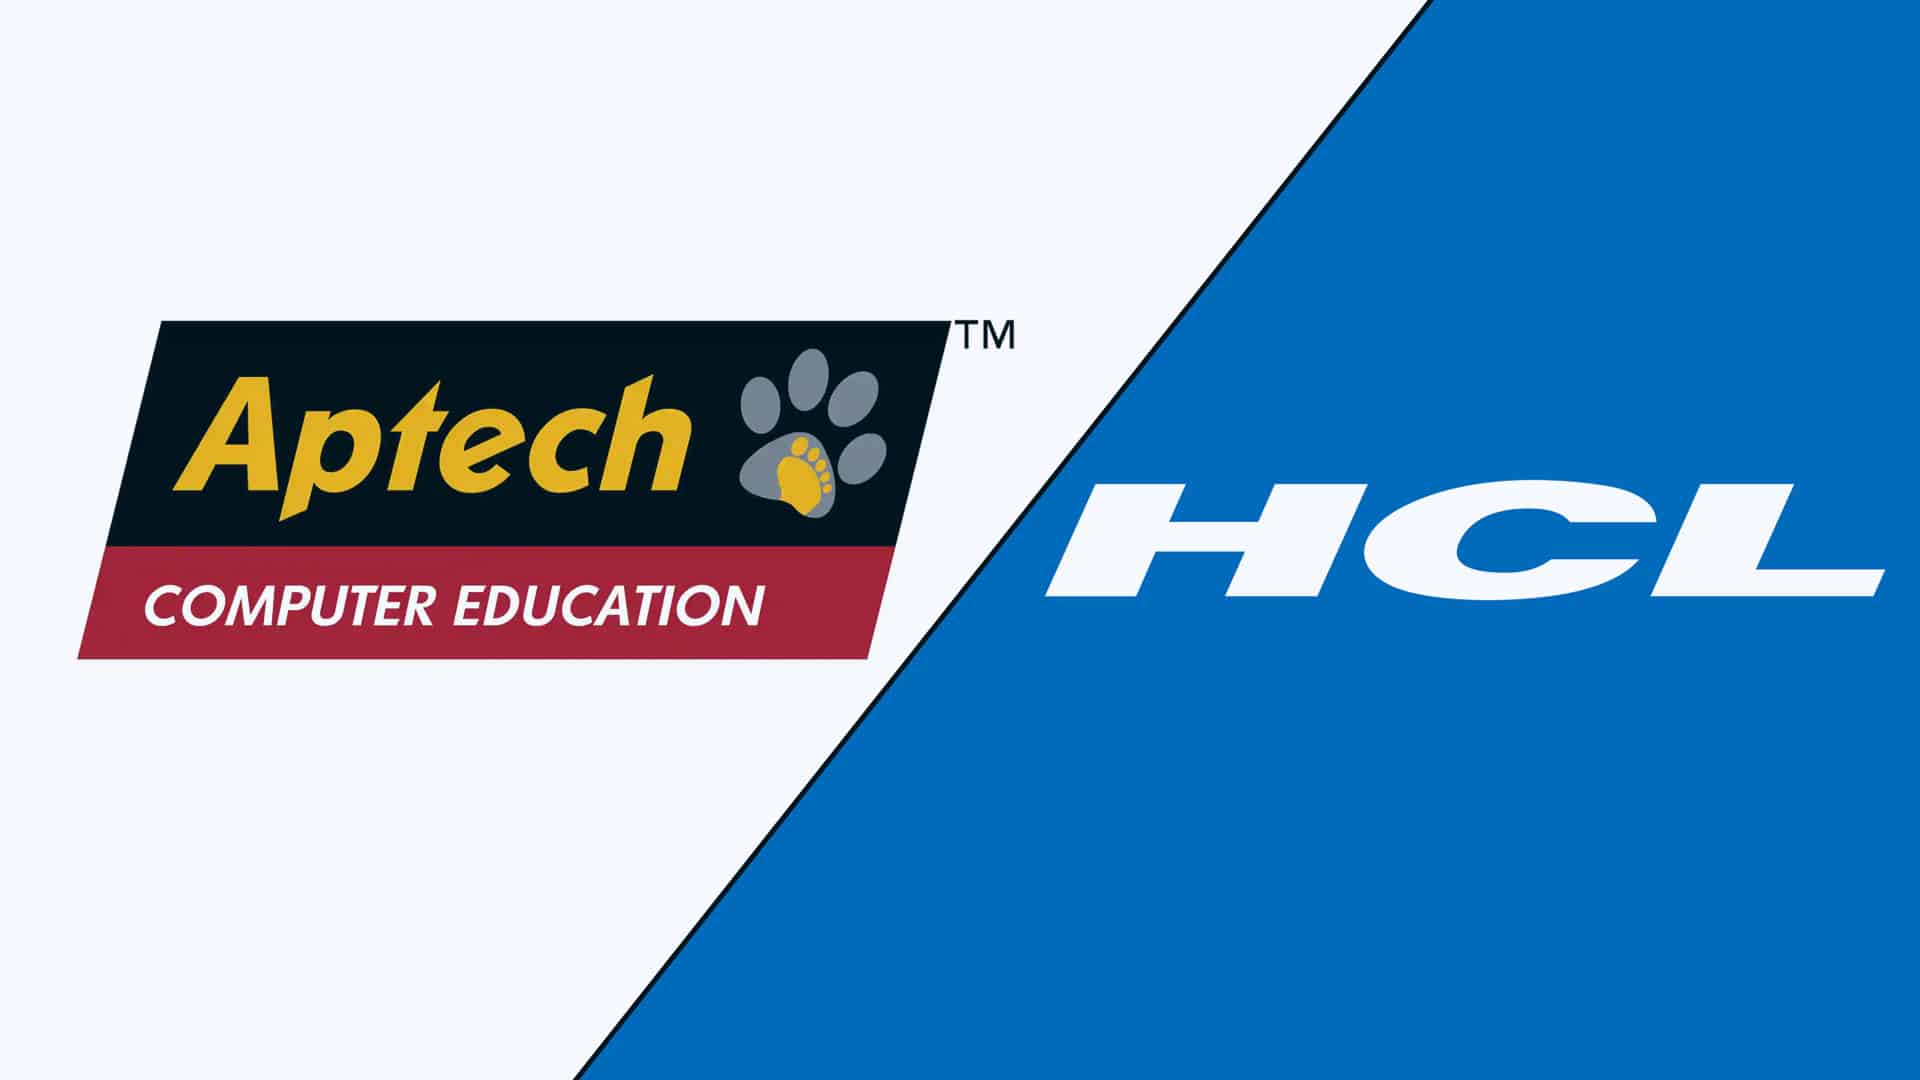 Aptech Announces Strategic Alliance with HCL Technologies to Build a Future-ready IT Talent Pool